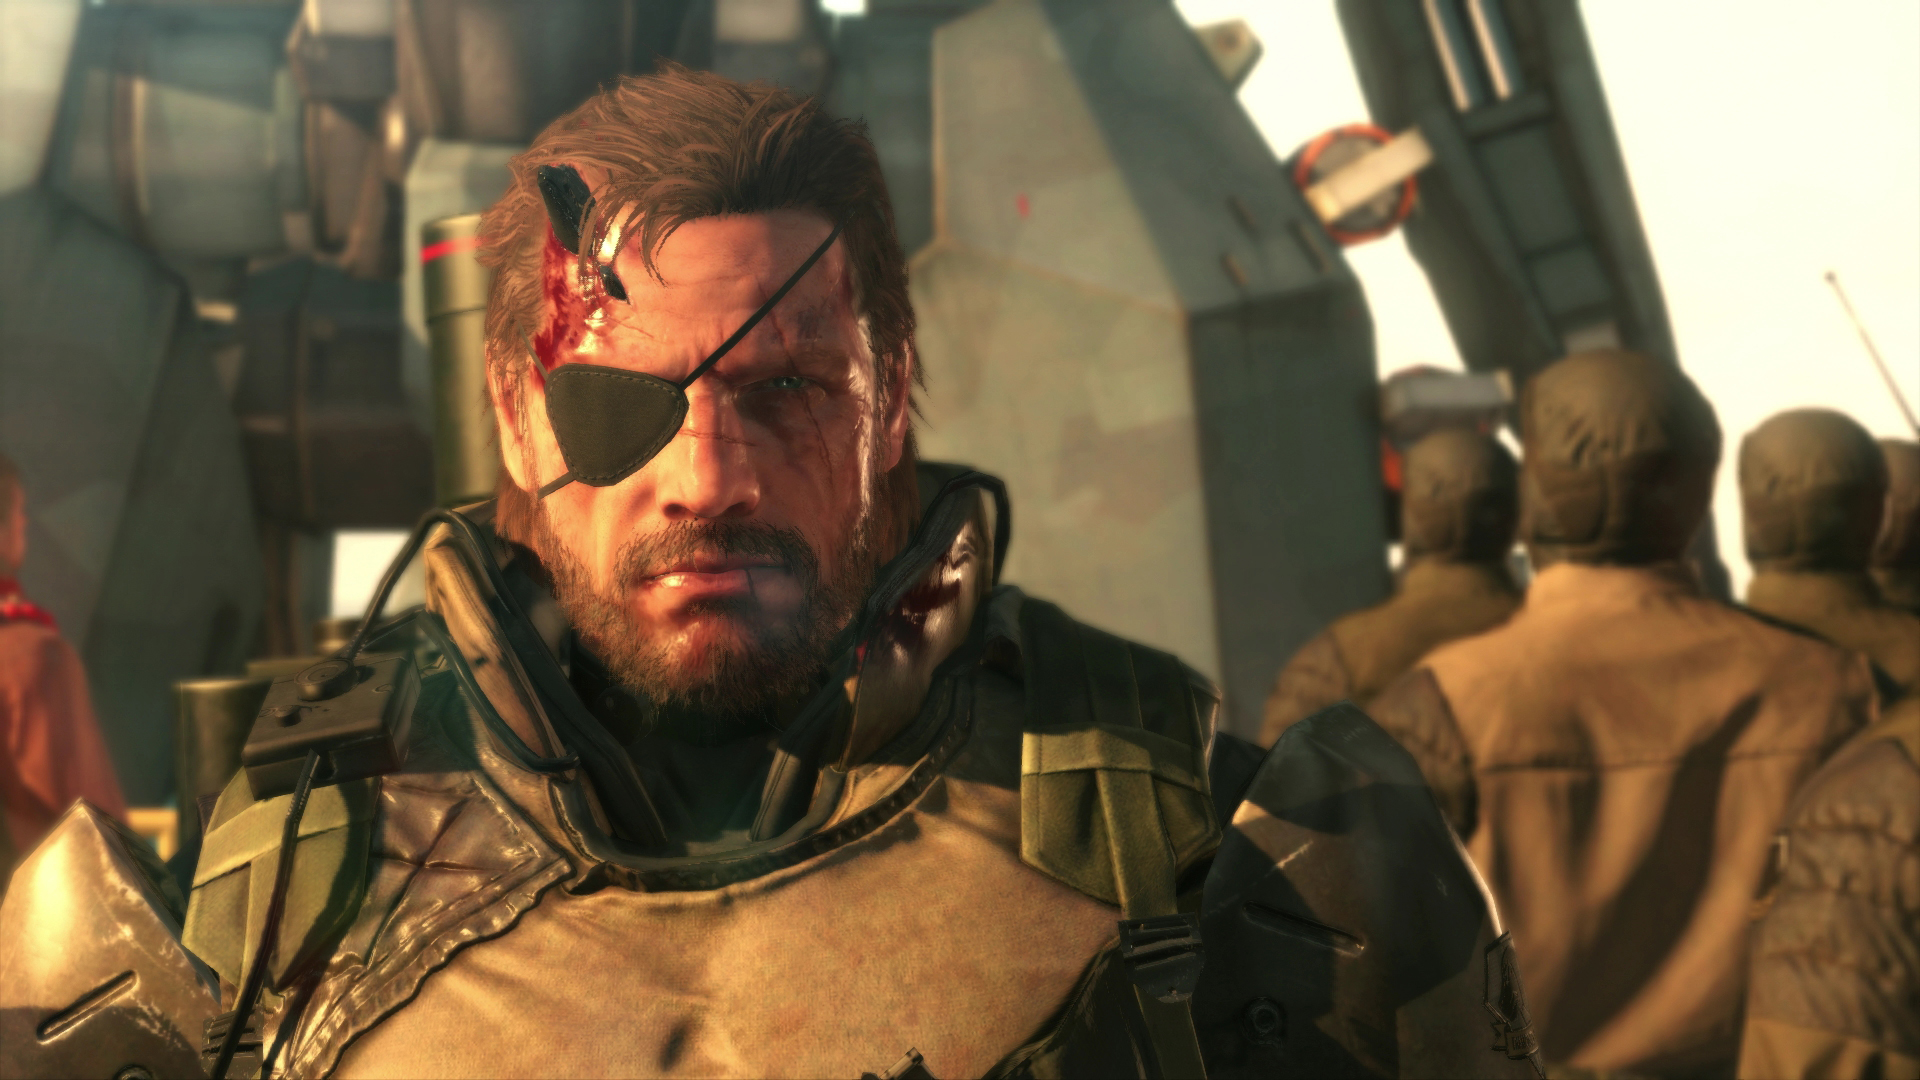 download free metal gear solid 5 pc